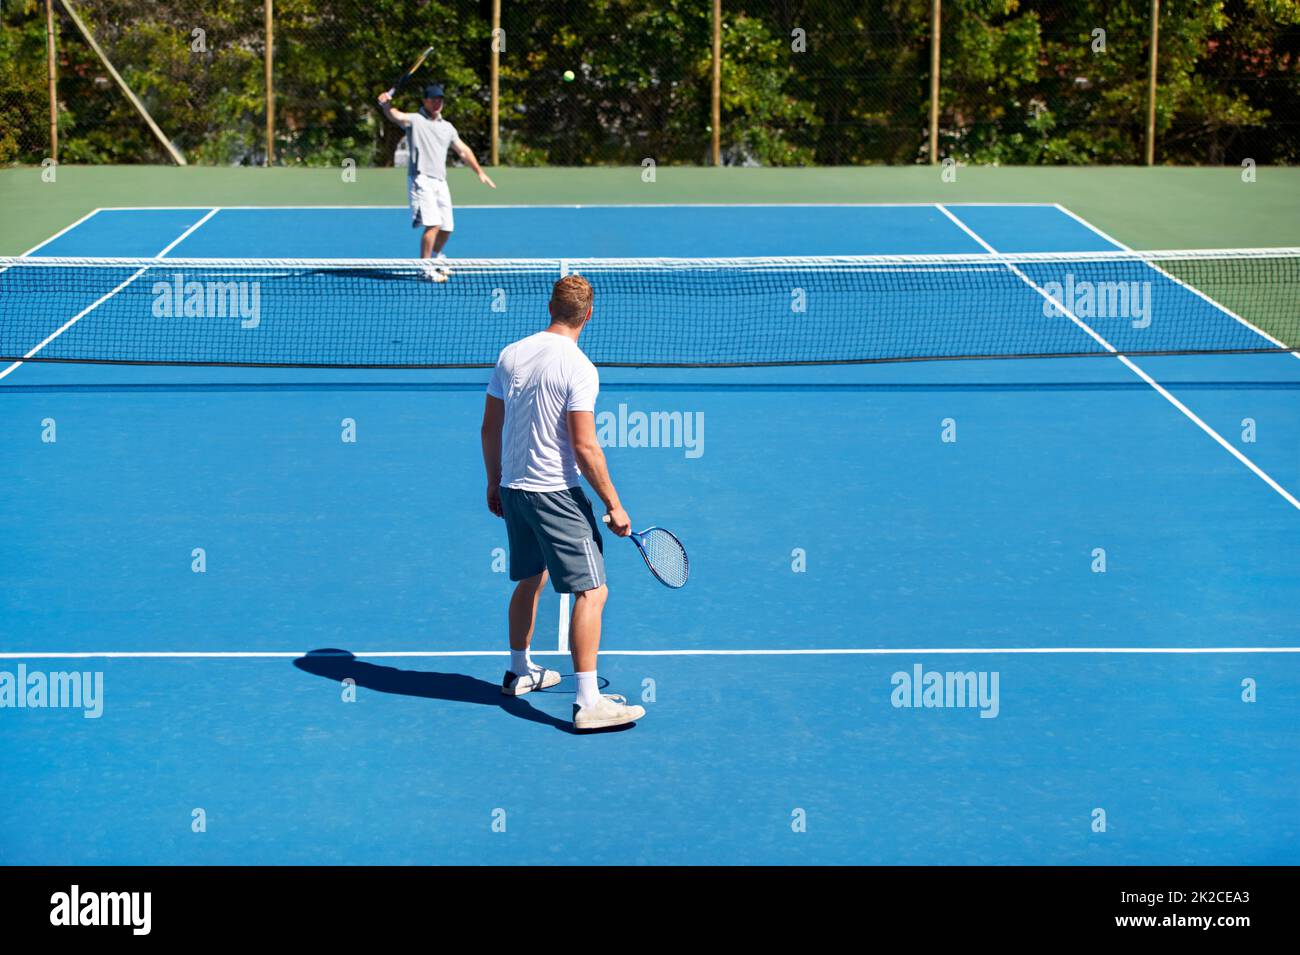 The game is on. People playing tennis on a tennis court. Stock Photo